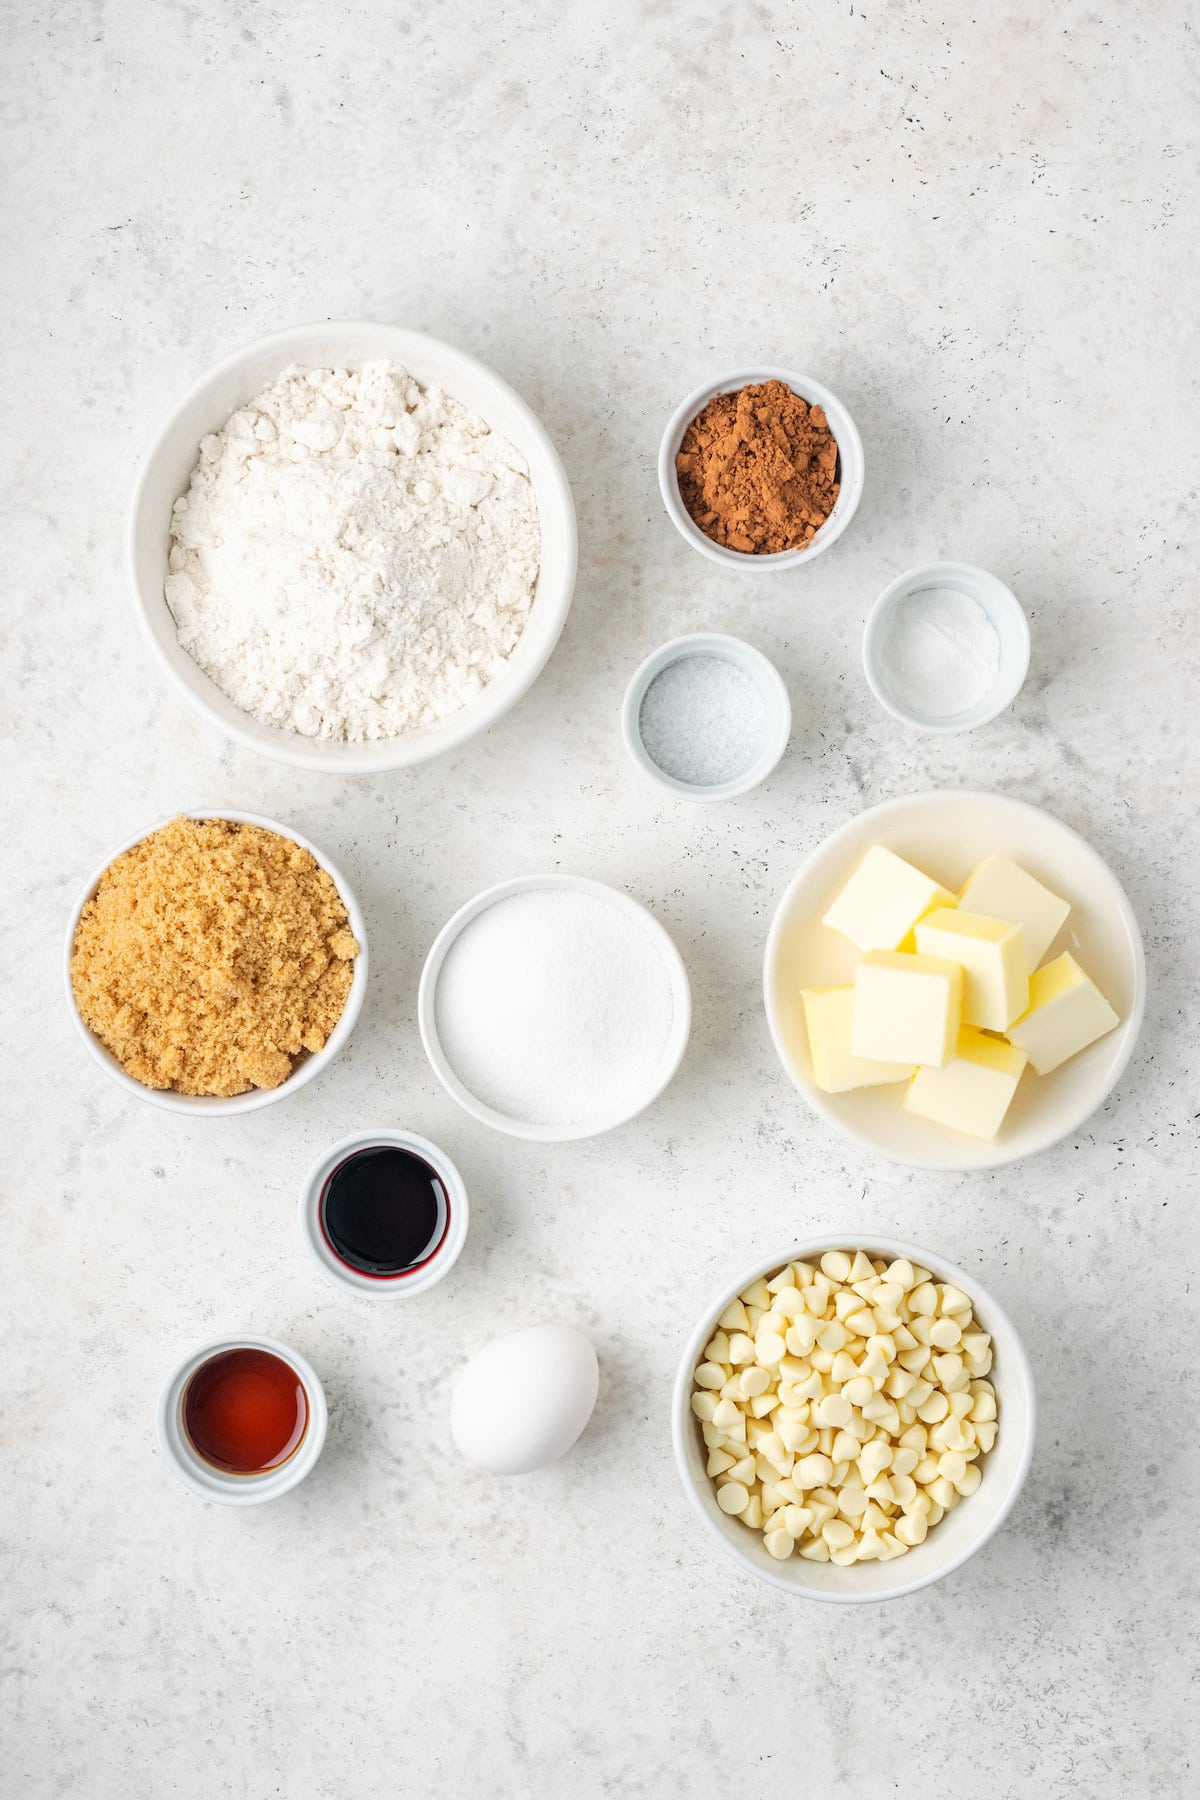 Ingredients needed to make red velvet cookies are shown: butter, brown sugar, granulated sugar, egg, white chocolate chips, gluten free flour mix.